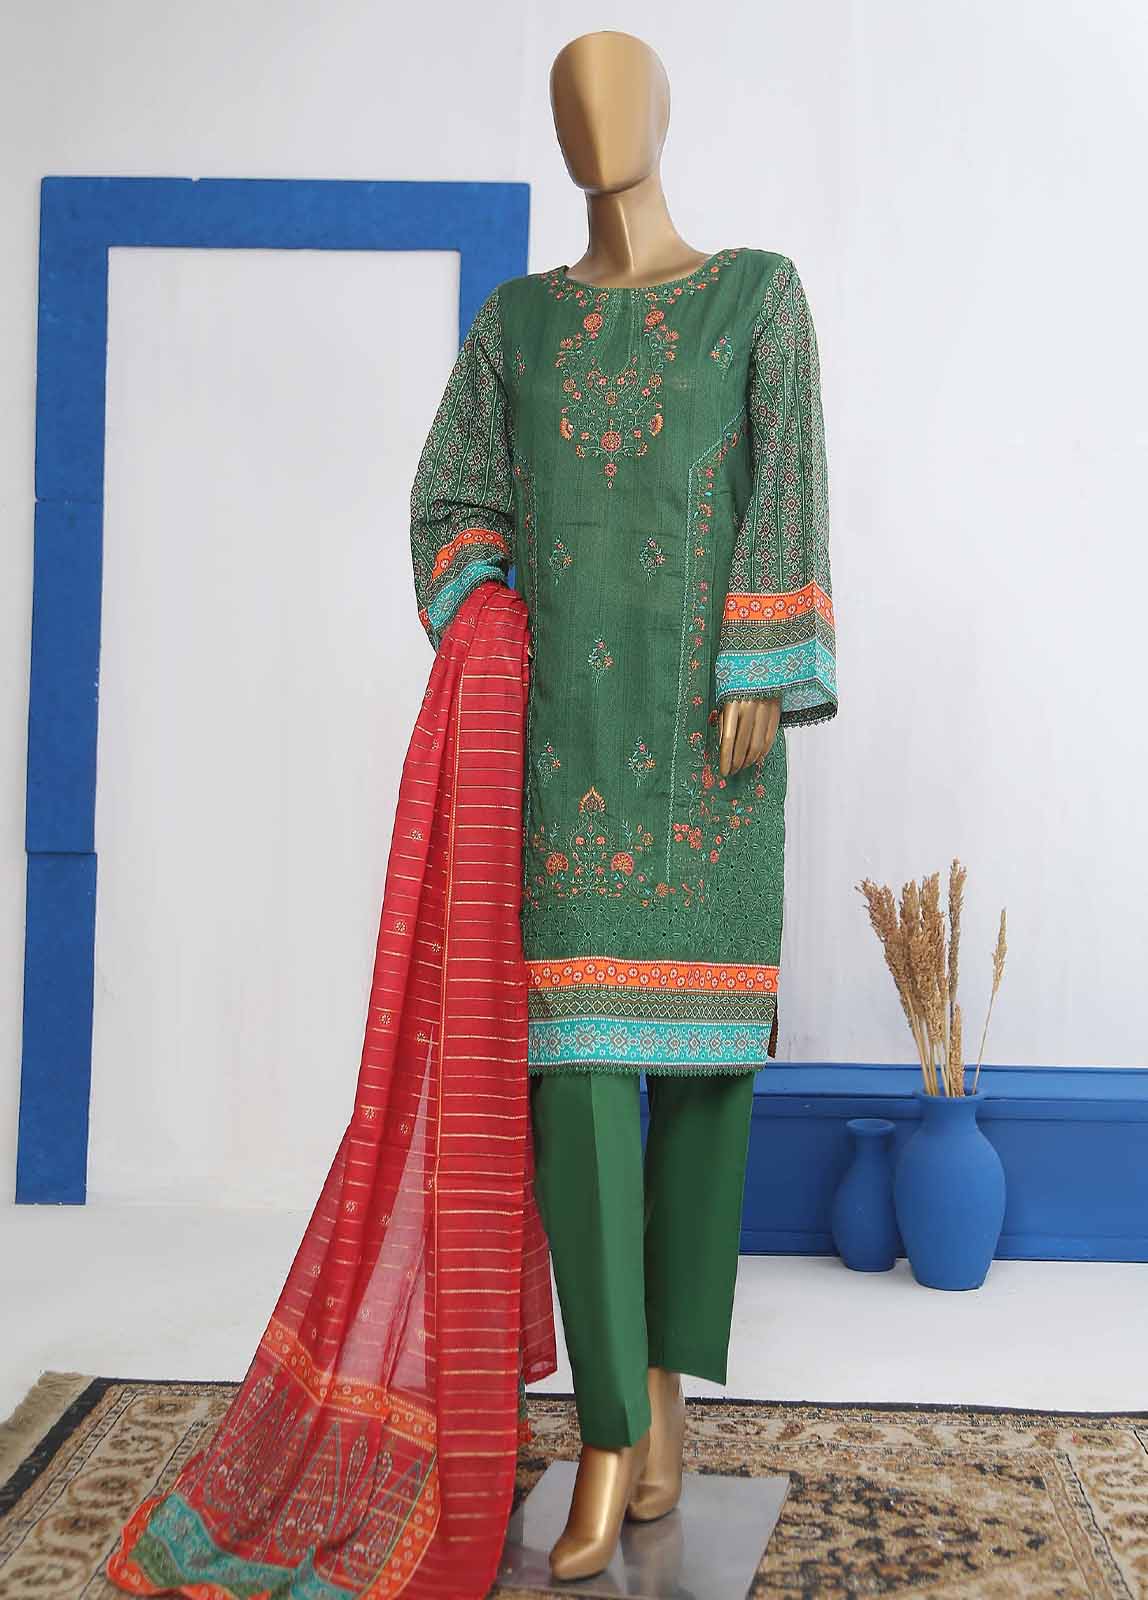 SMLE-0193- 3 Piece Embroidered Stitched Suit